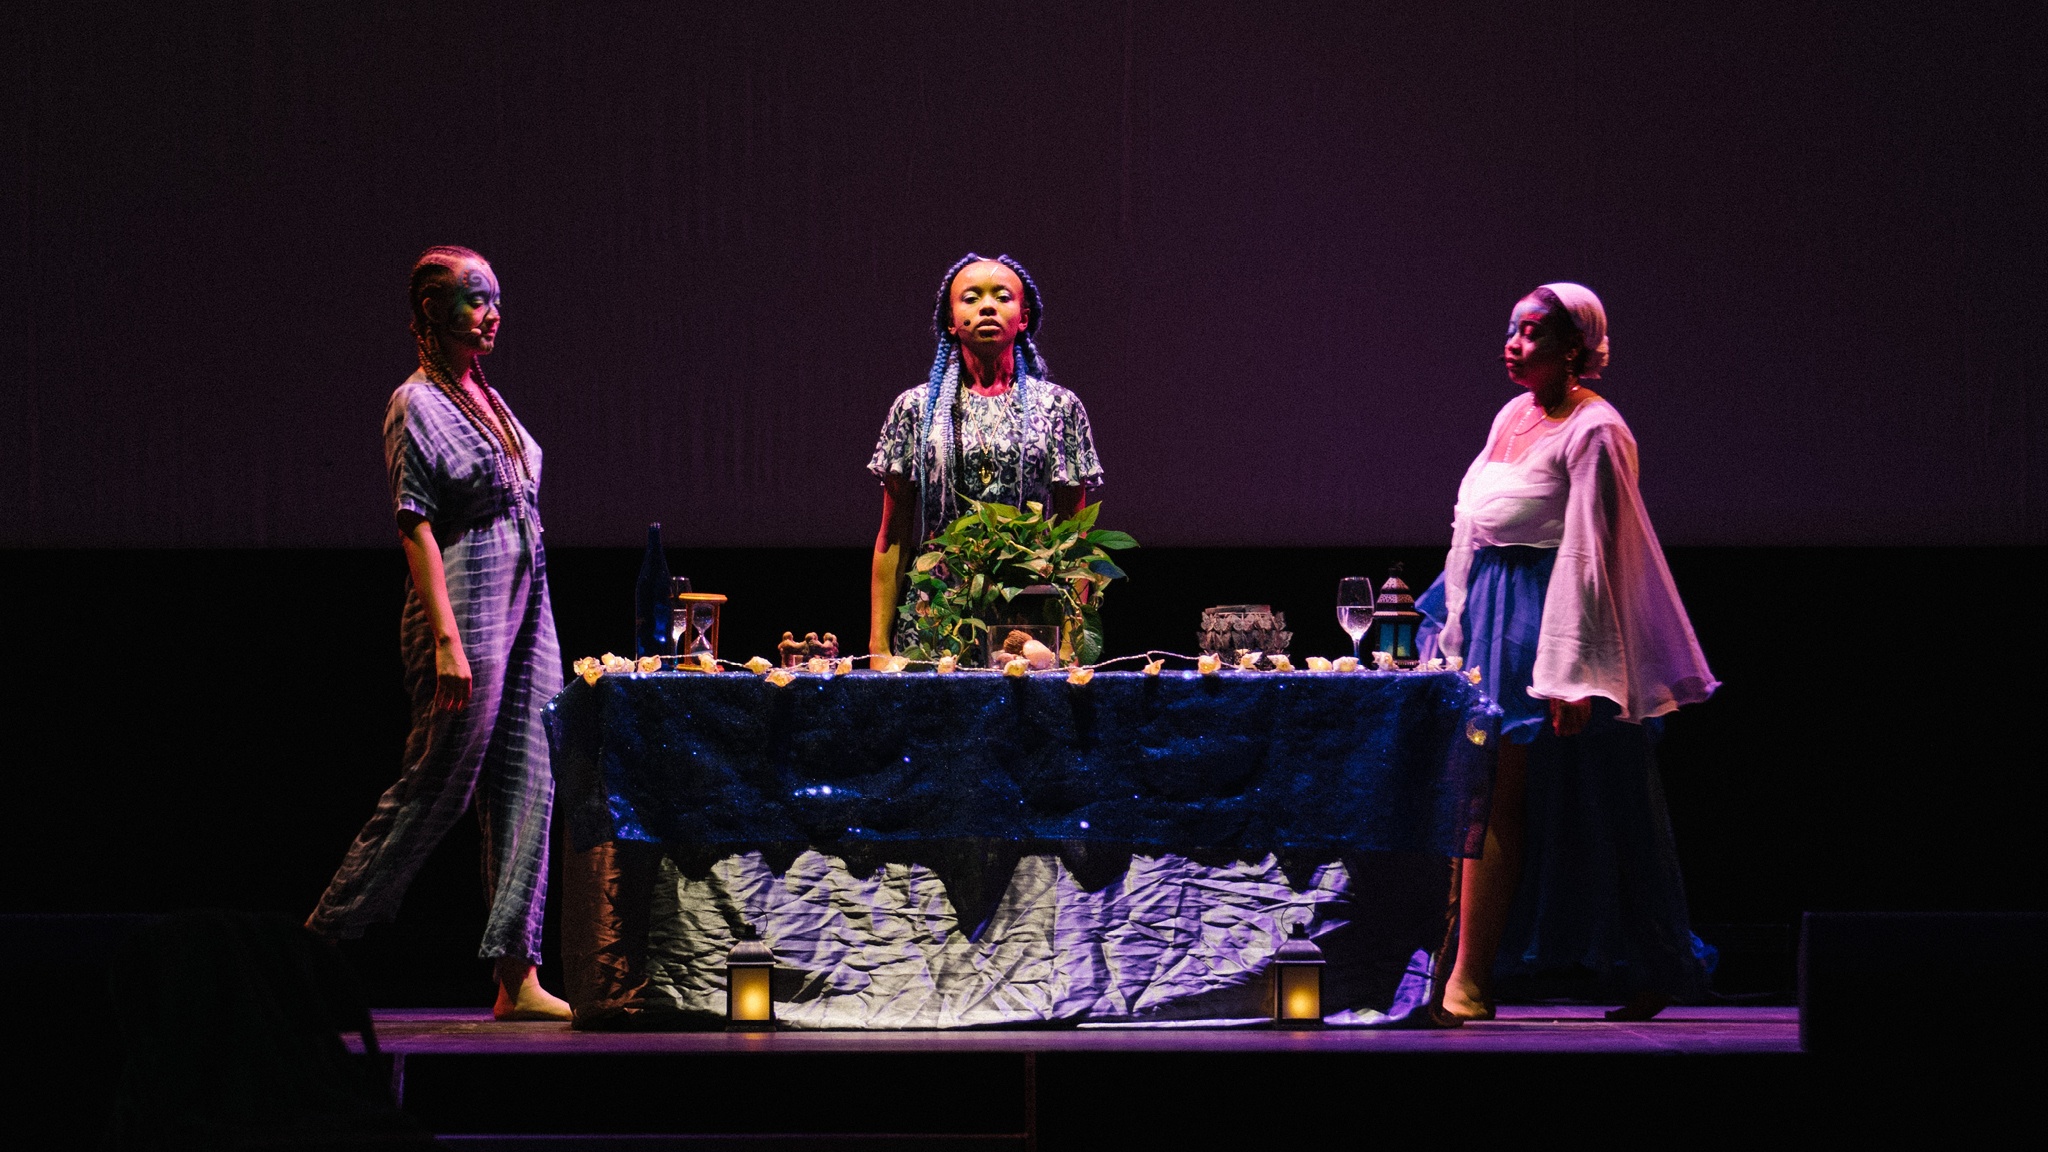 Three performers stand around a table resembling an altar that is illuminated by dramatic stage lighting